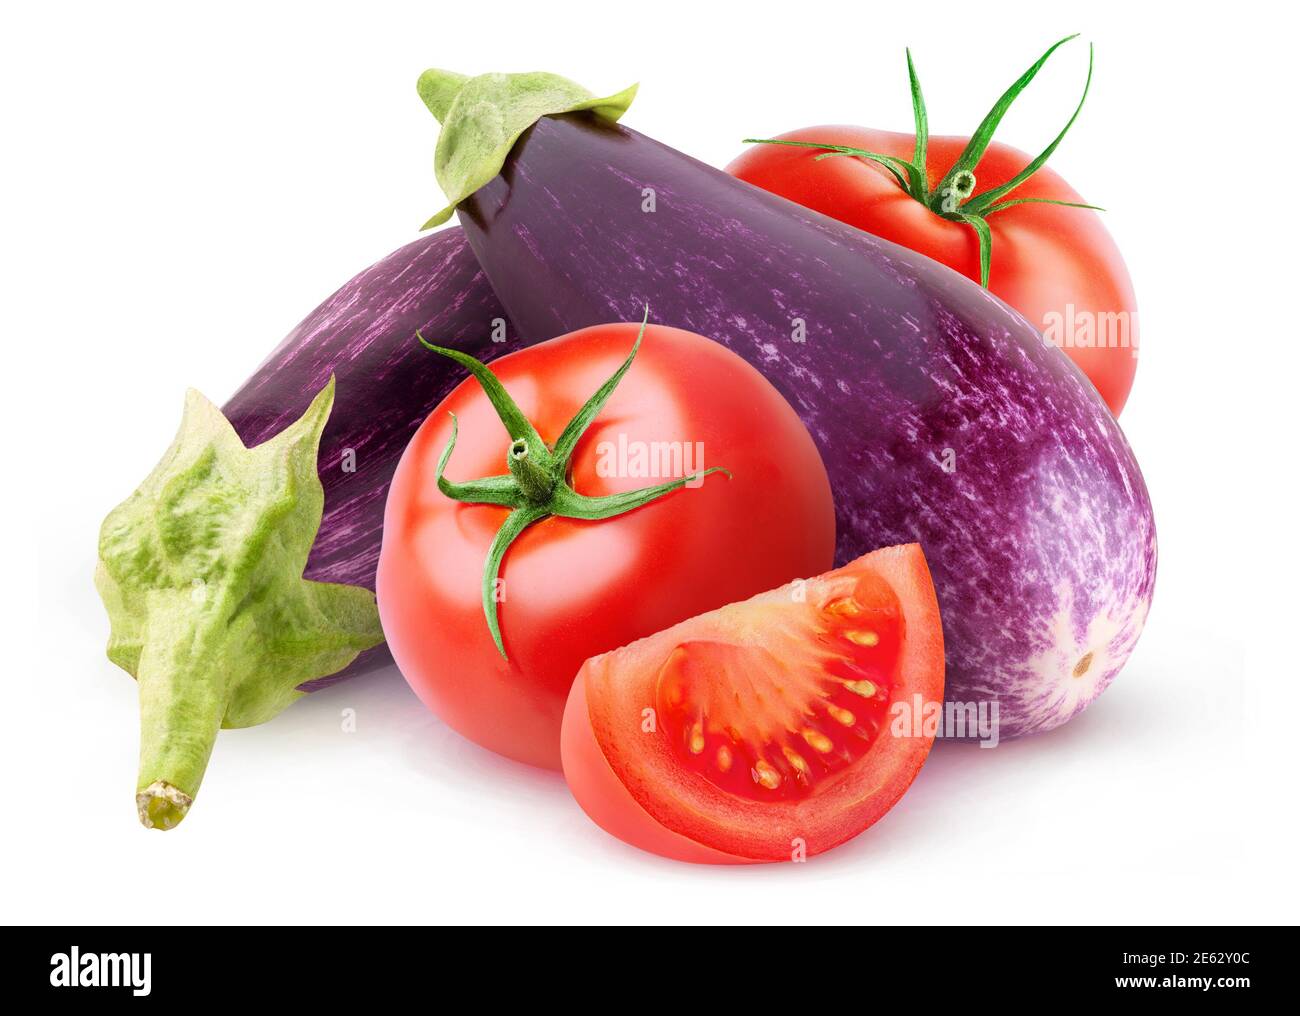 Isolated vegetables. Raw eggplants and tomatoes isolated on white background Stock Photo